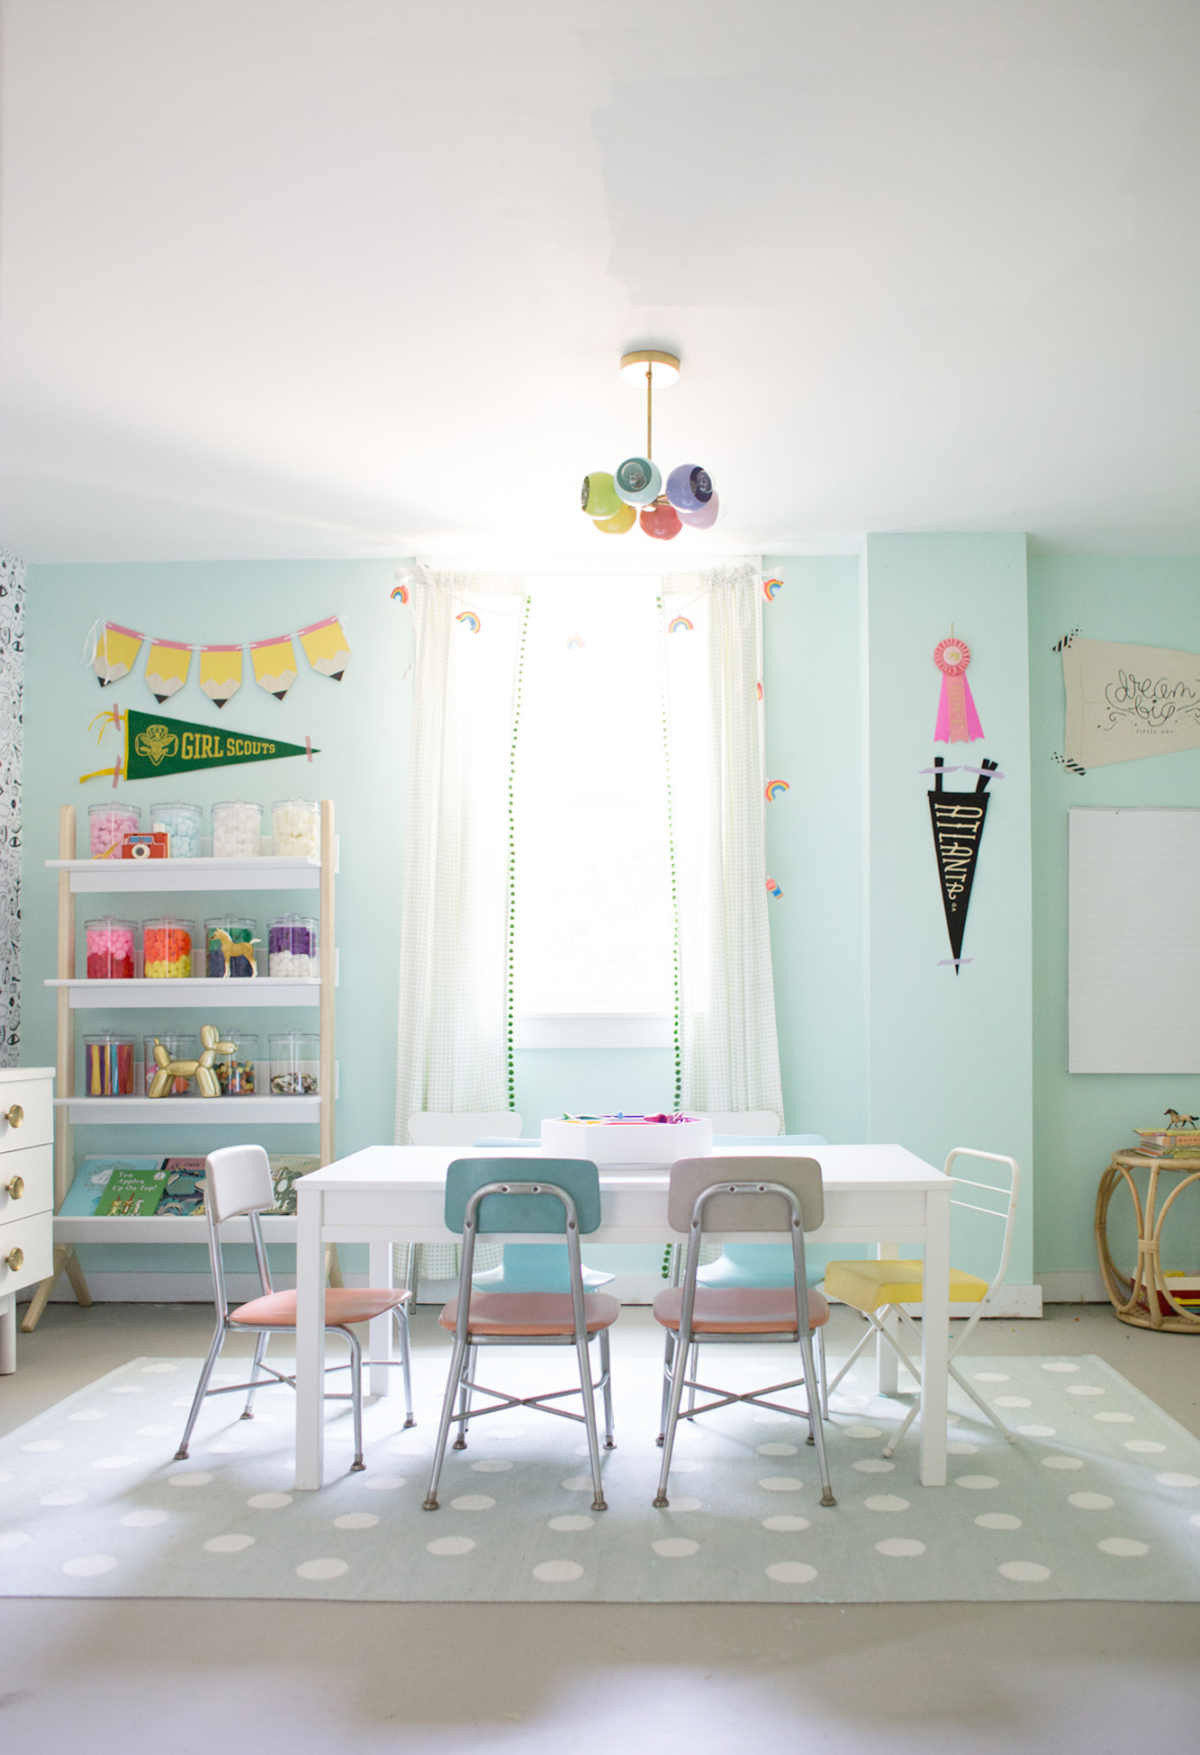 Kids Craft Room Ideas
 Craft Room Ideas For Kids Lay Baby Lay